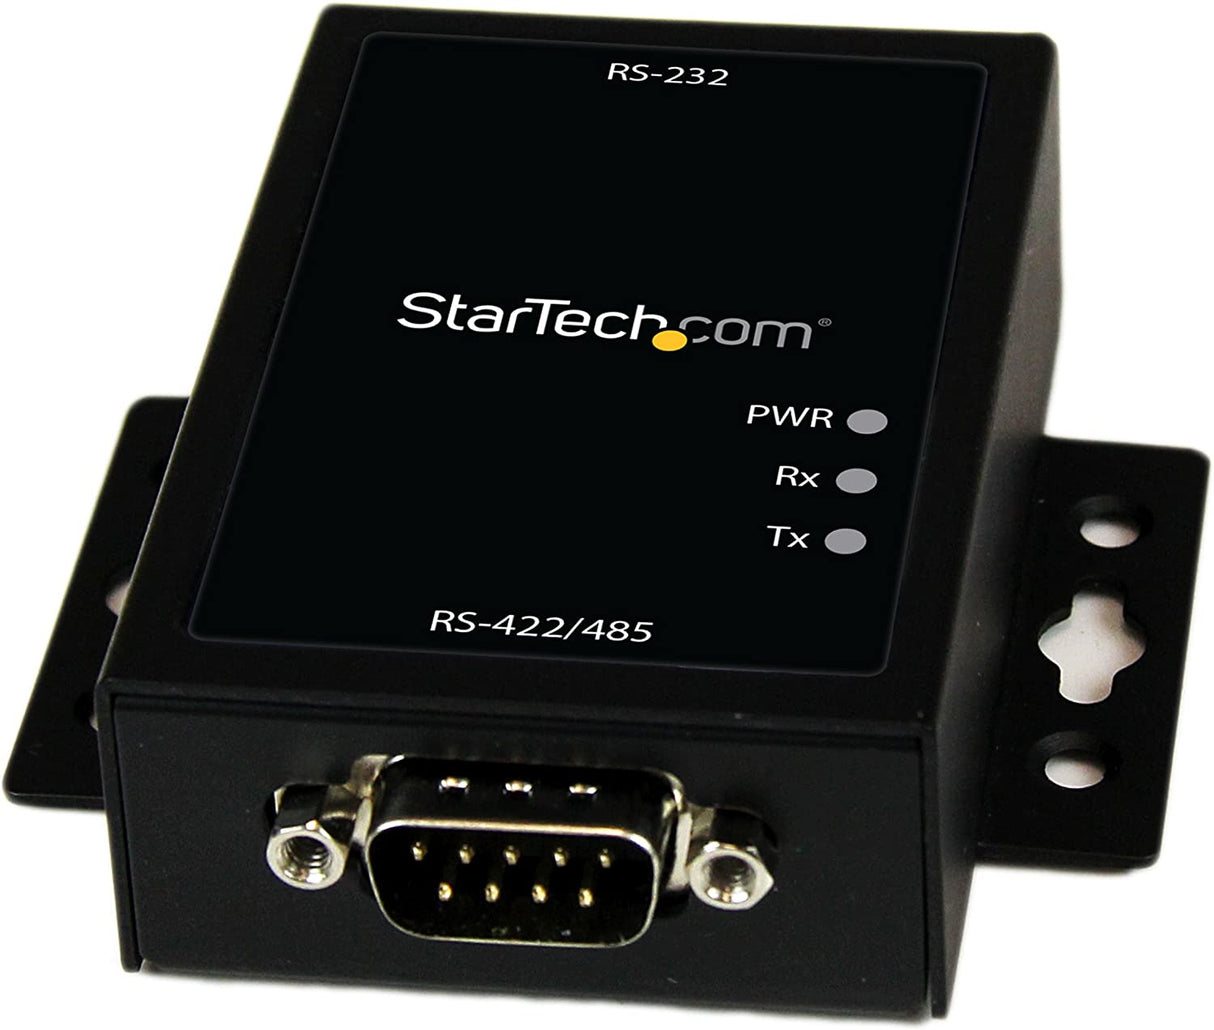 StarTech.com Industrial RS232 to RS422/485 Serial Port Converter w/ 15KV ESD Protection - RS232 to RS 422 RS485 Converter Adapter (IC232485S)